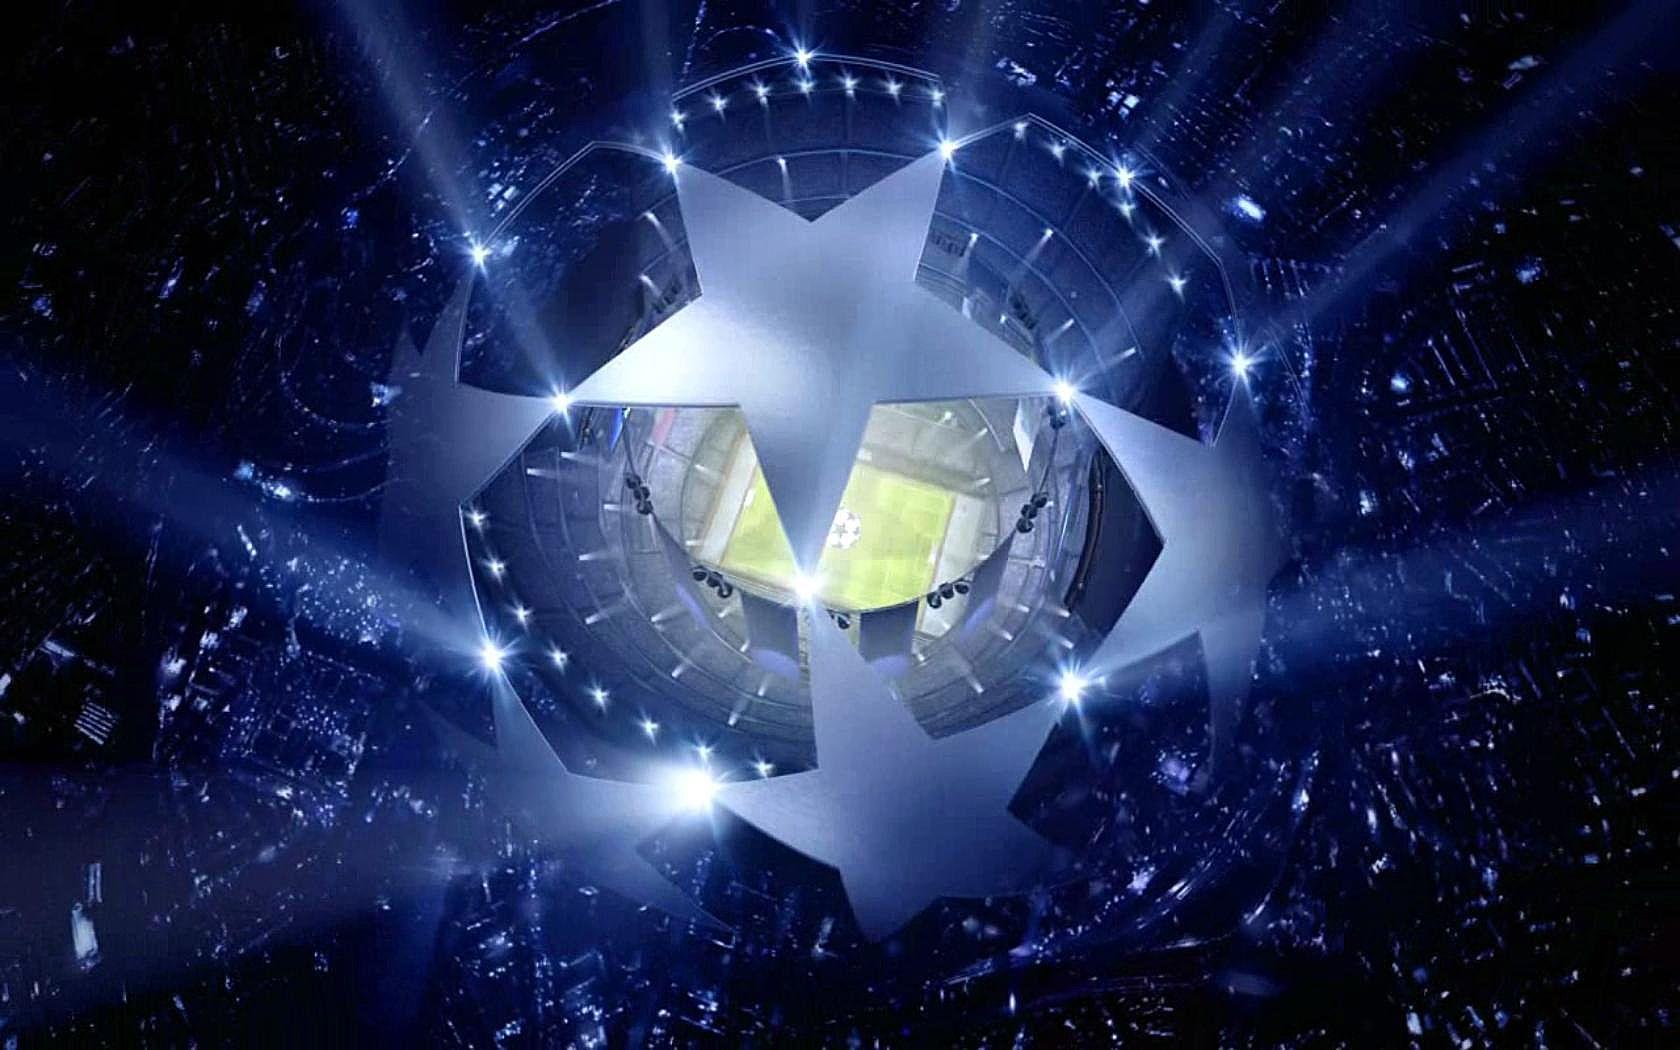 The UEFA CHAMPIONS LEAGUE IS BACK! GET YOUR TICKETS NOW! ENJOY THE